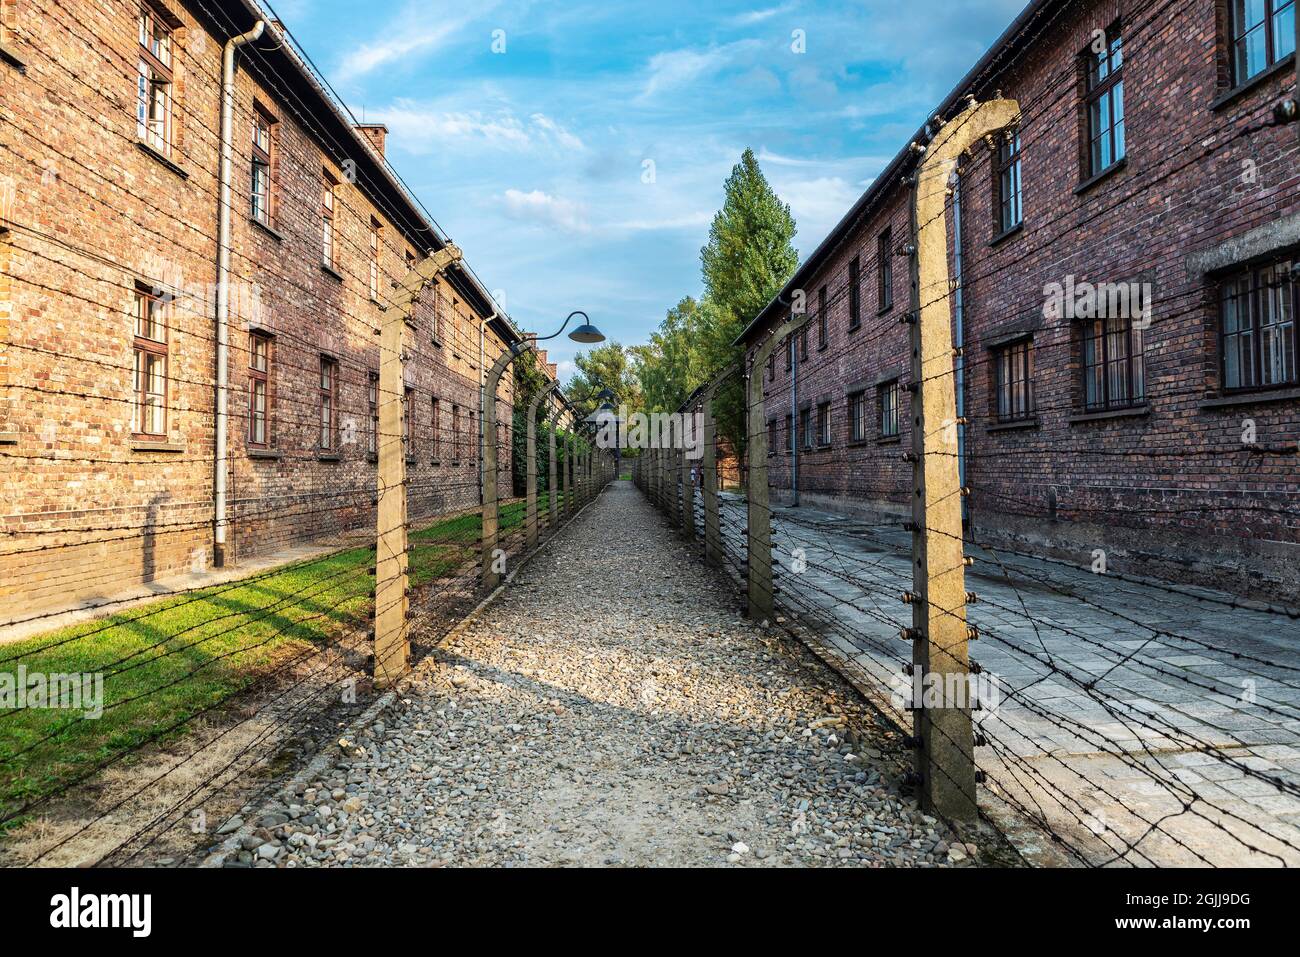 Auschwitz, Poland - August 30, 2018: Electrified fence of the Auschwitz concentration camp, an extermination camp operated by Nazi Germany during Worl Stock Photo